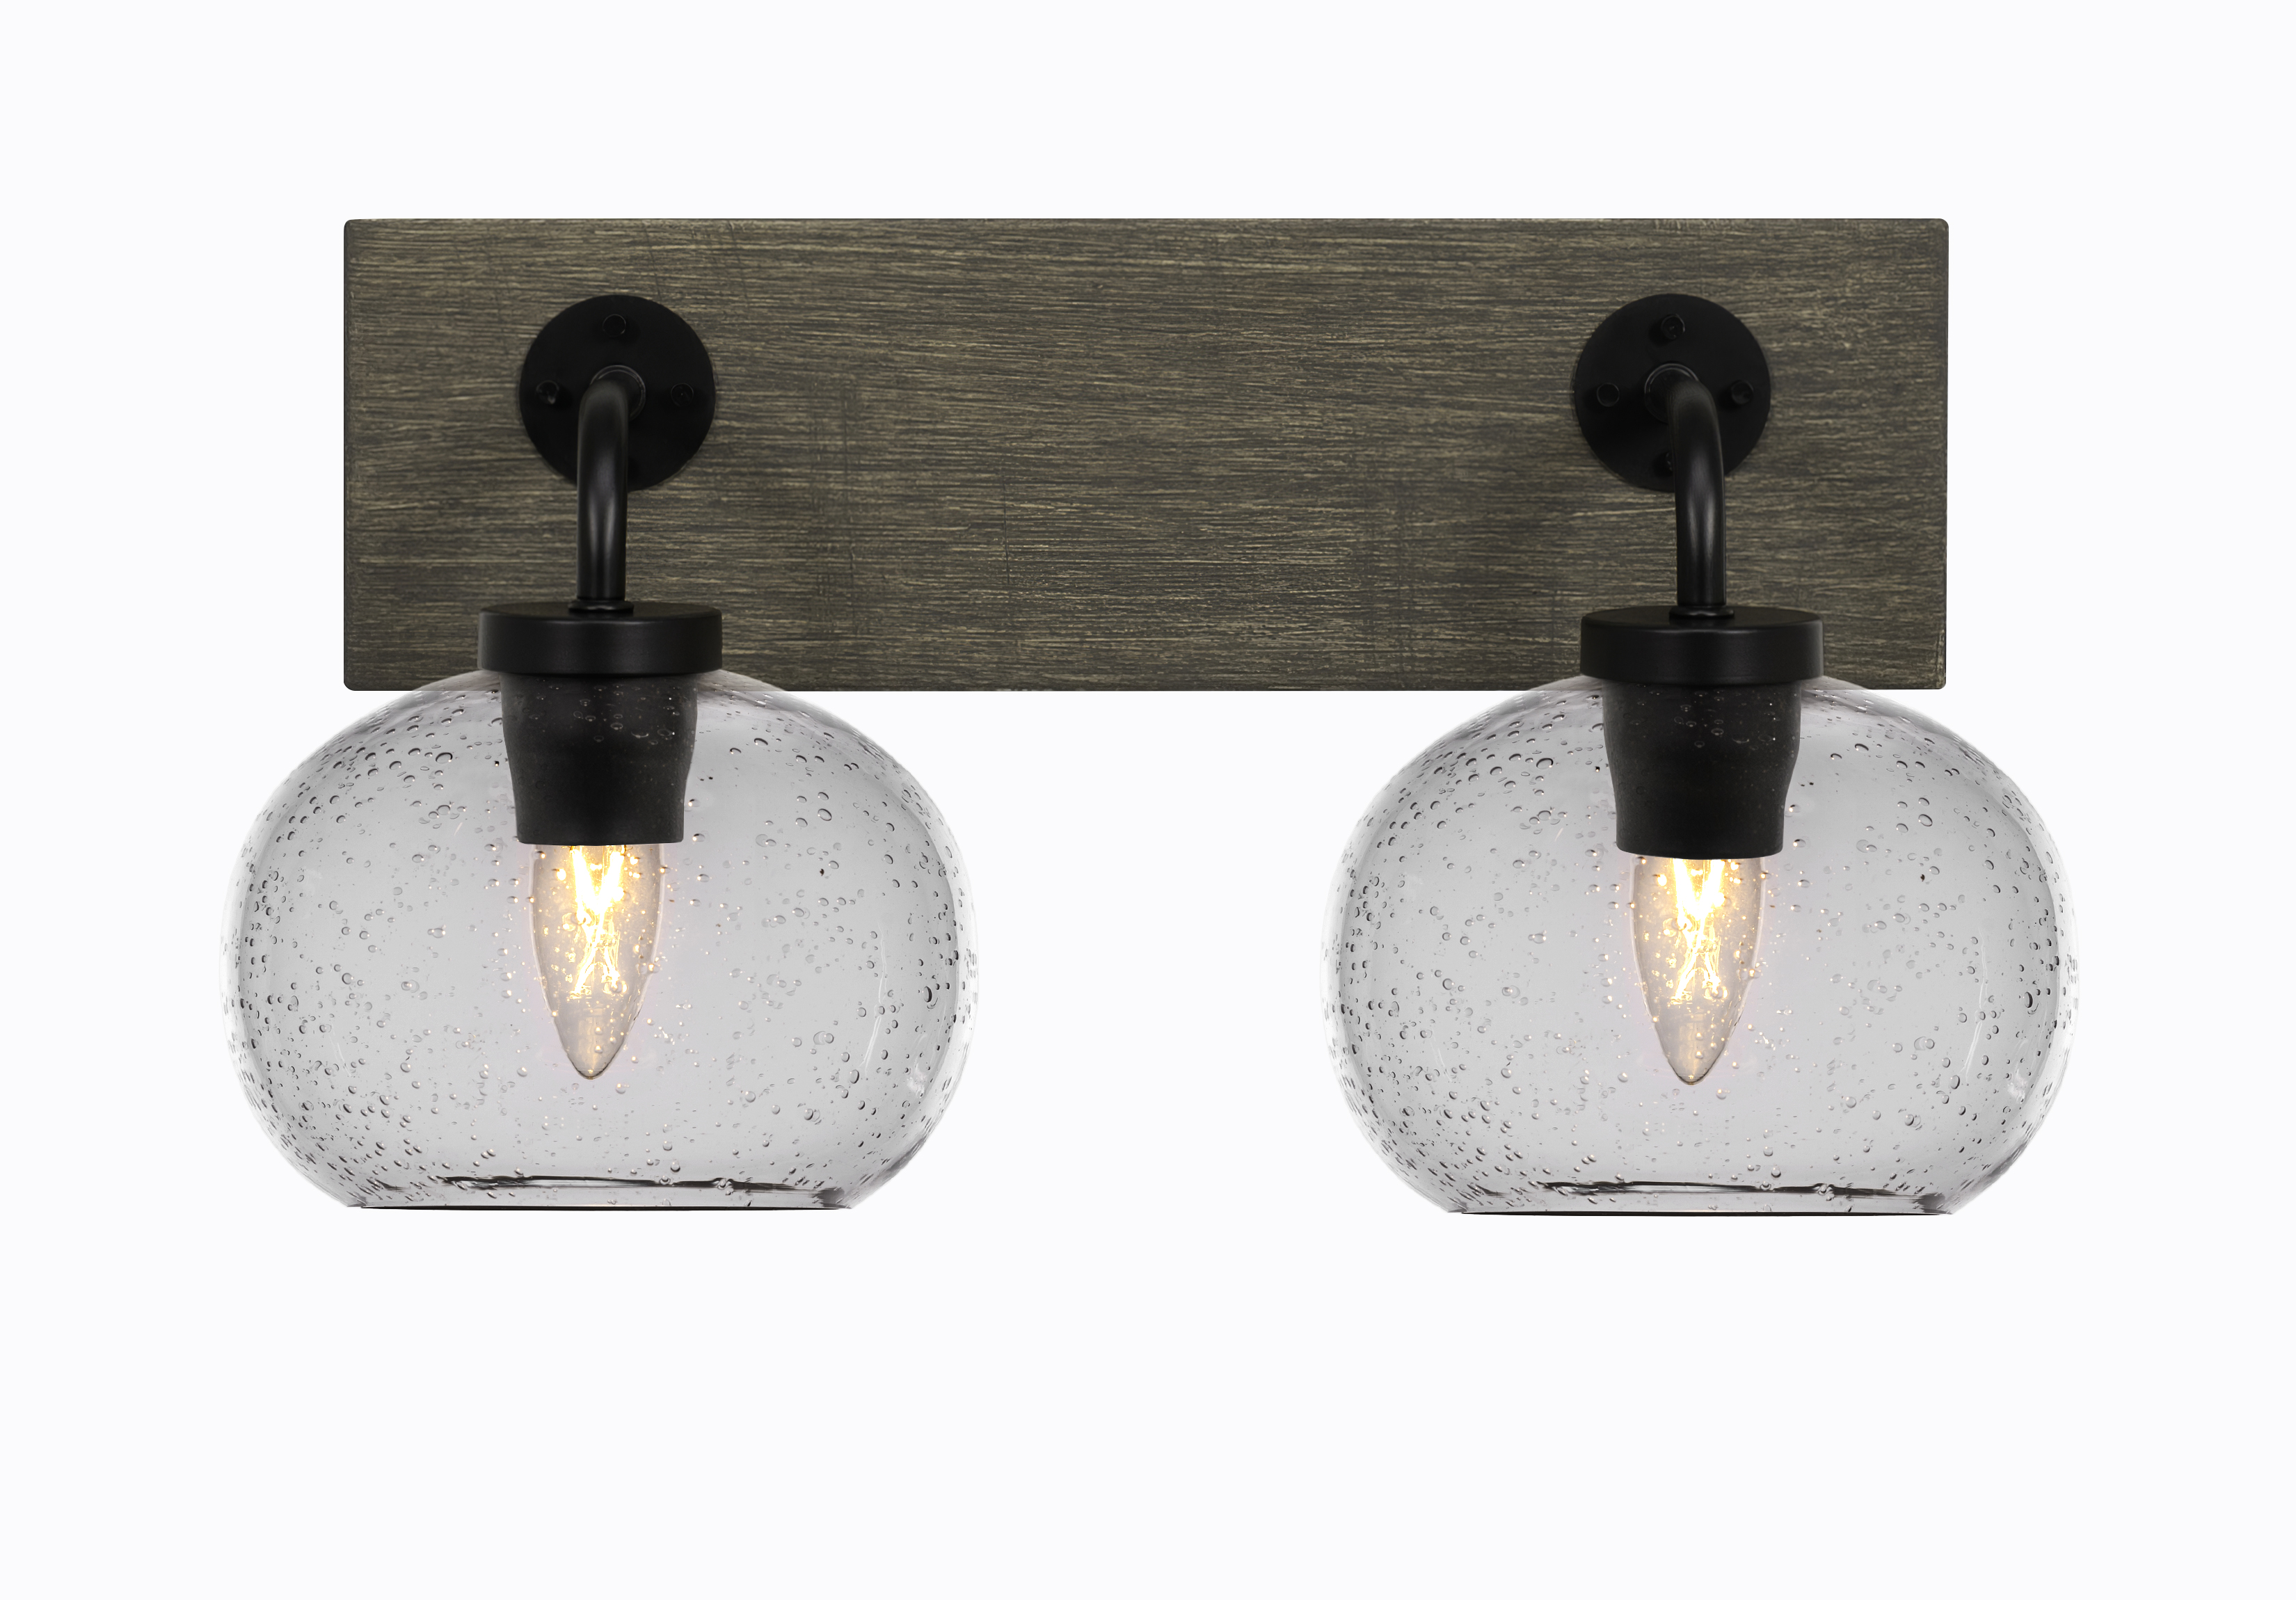 Toltec Lighting 1772-MBDW-202 Oxbridge 2 Light Bath Bar In Matte Black & Painted Distressed Wood-look Metal Finish With 7" Clear Bubble Glass